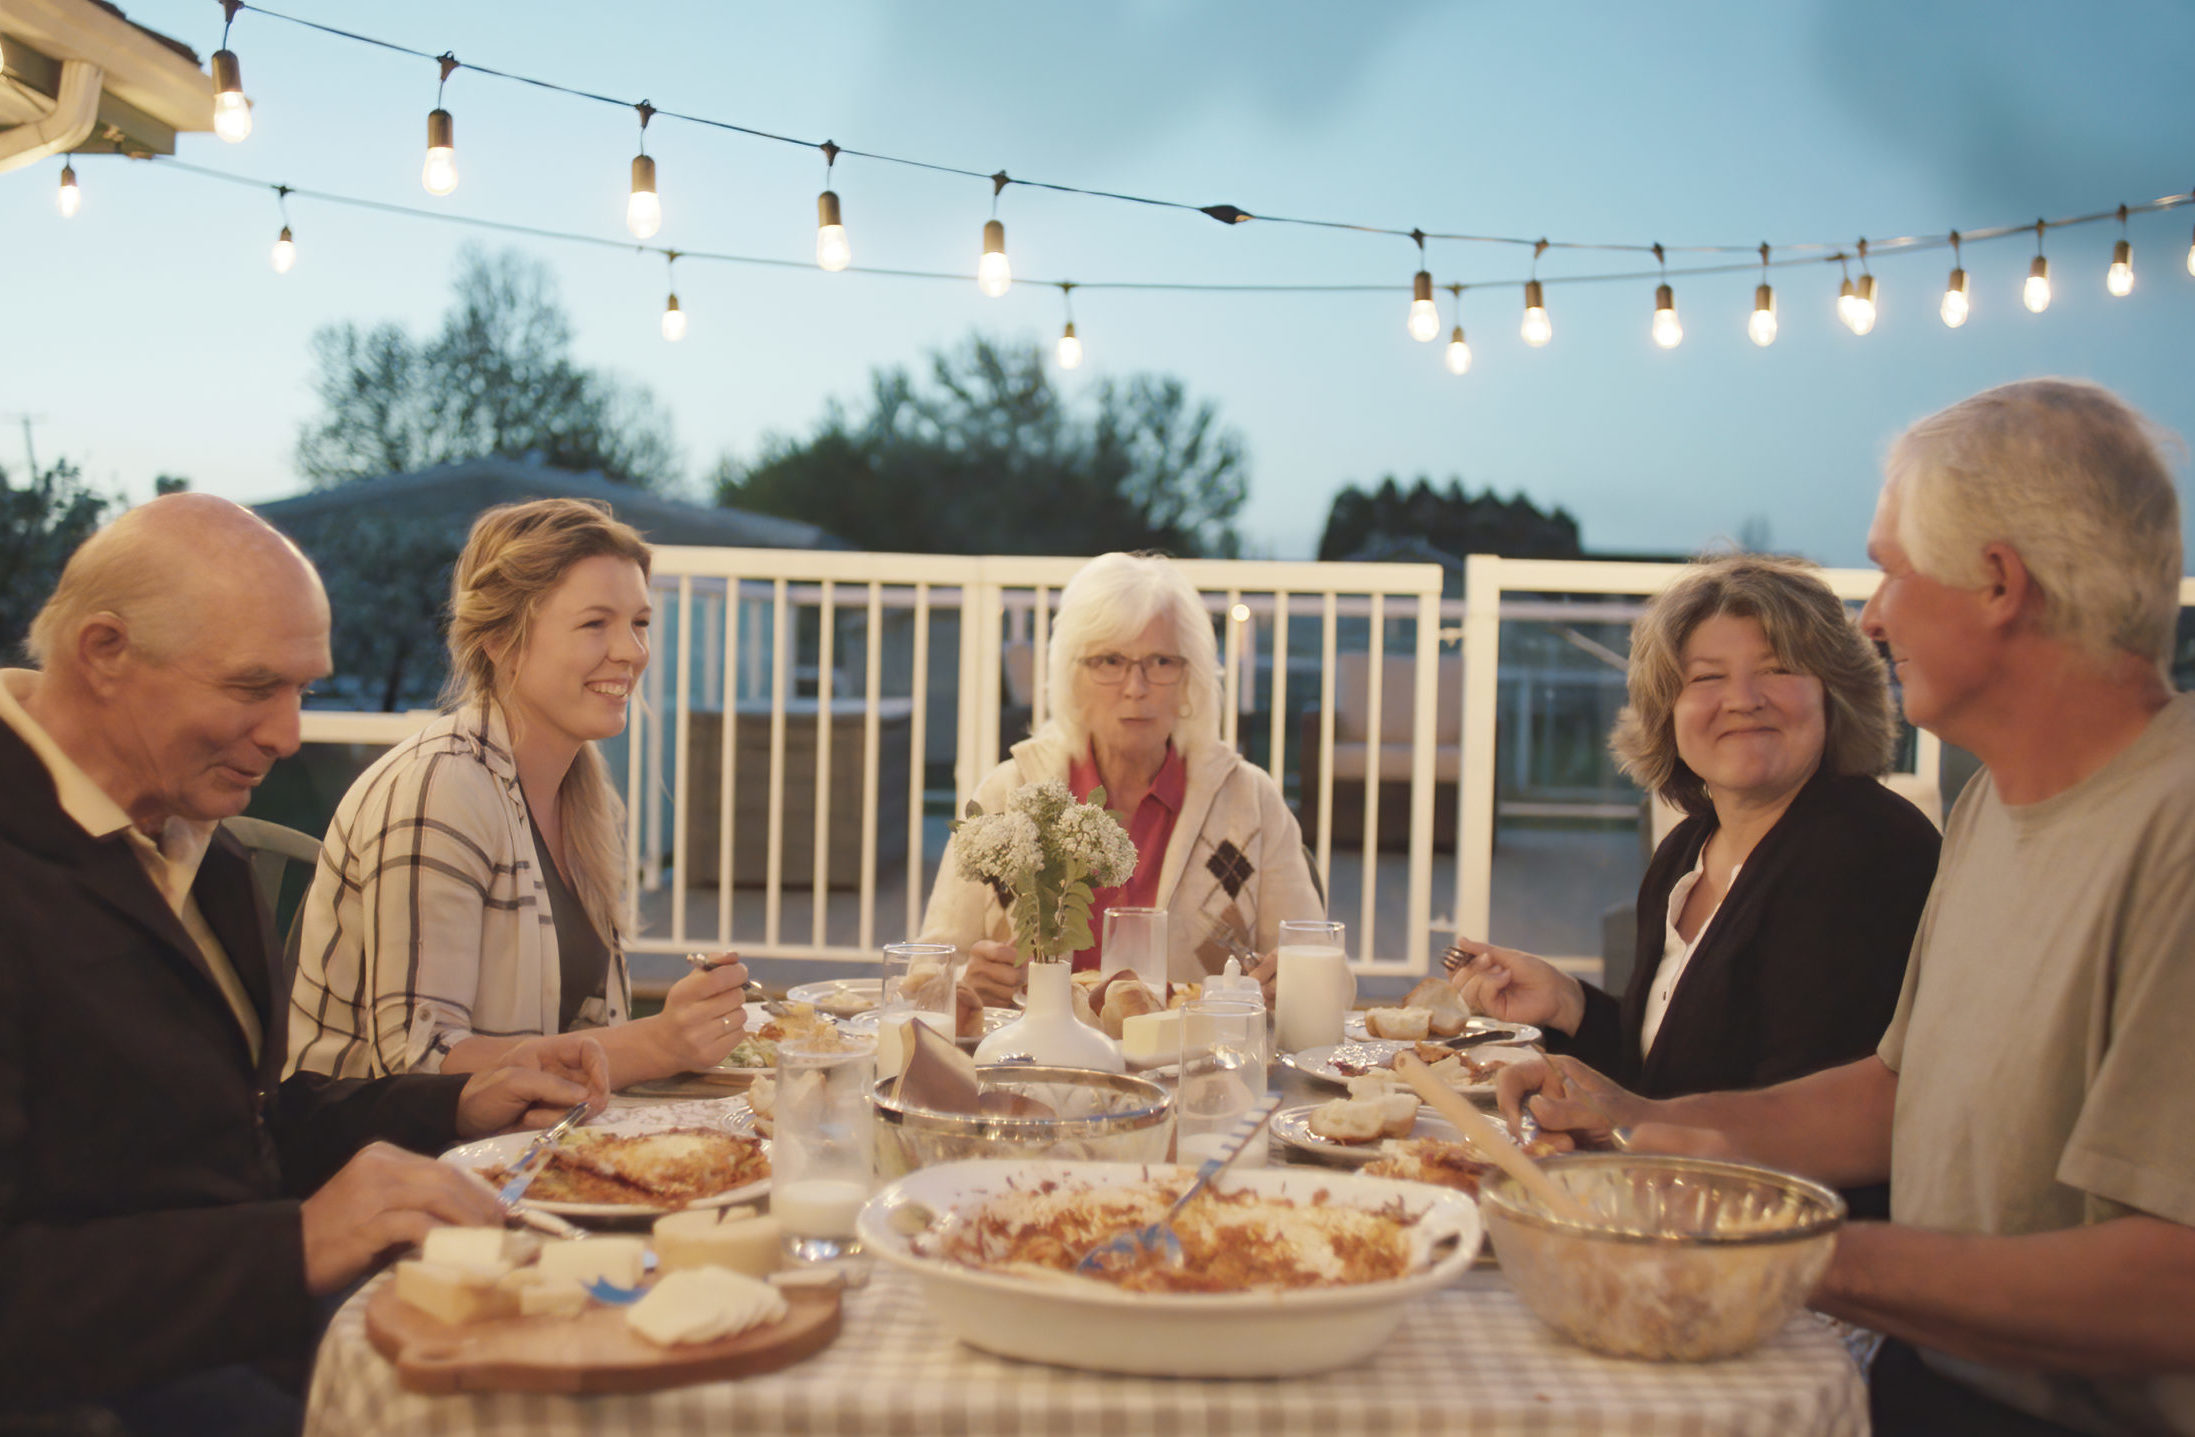 Multi-generational family sitting at an outdoor table in the evening enjoying a meal together